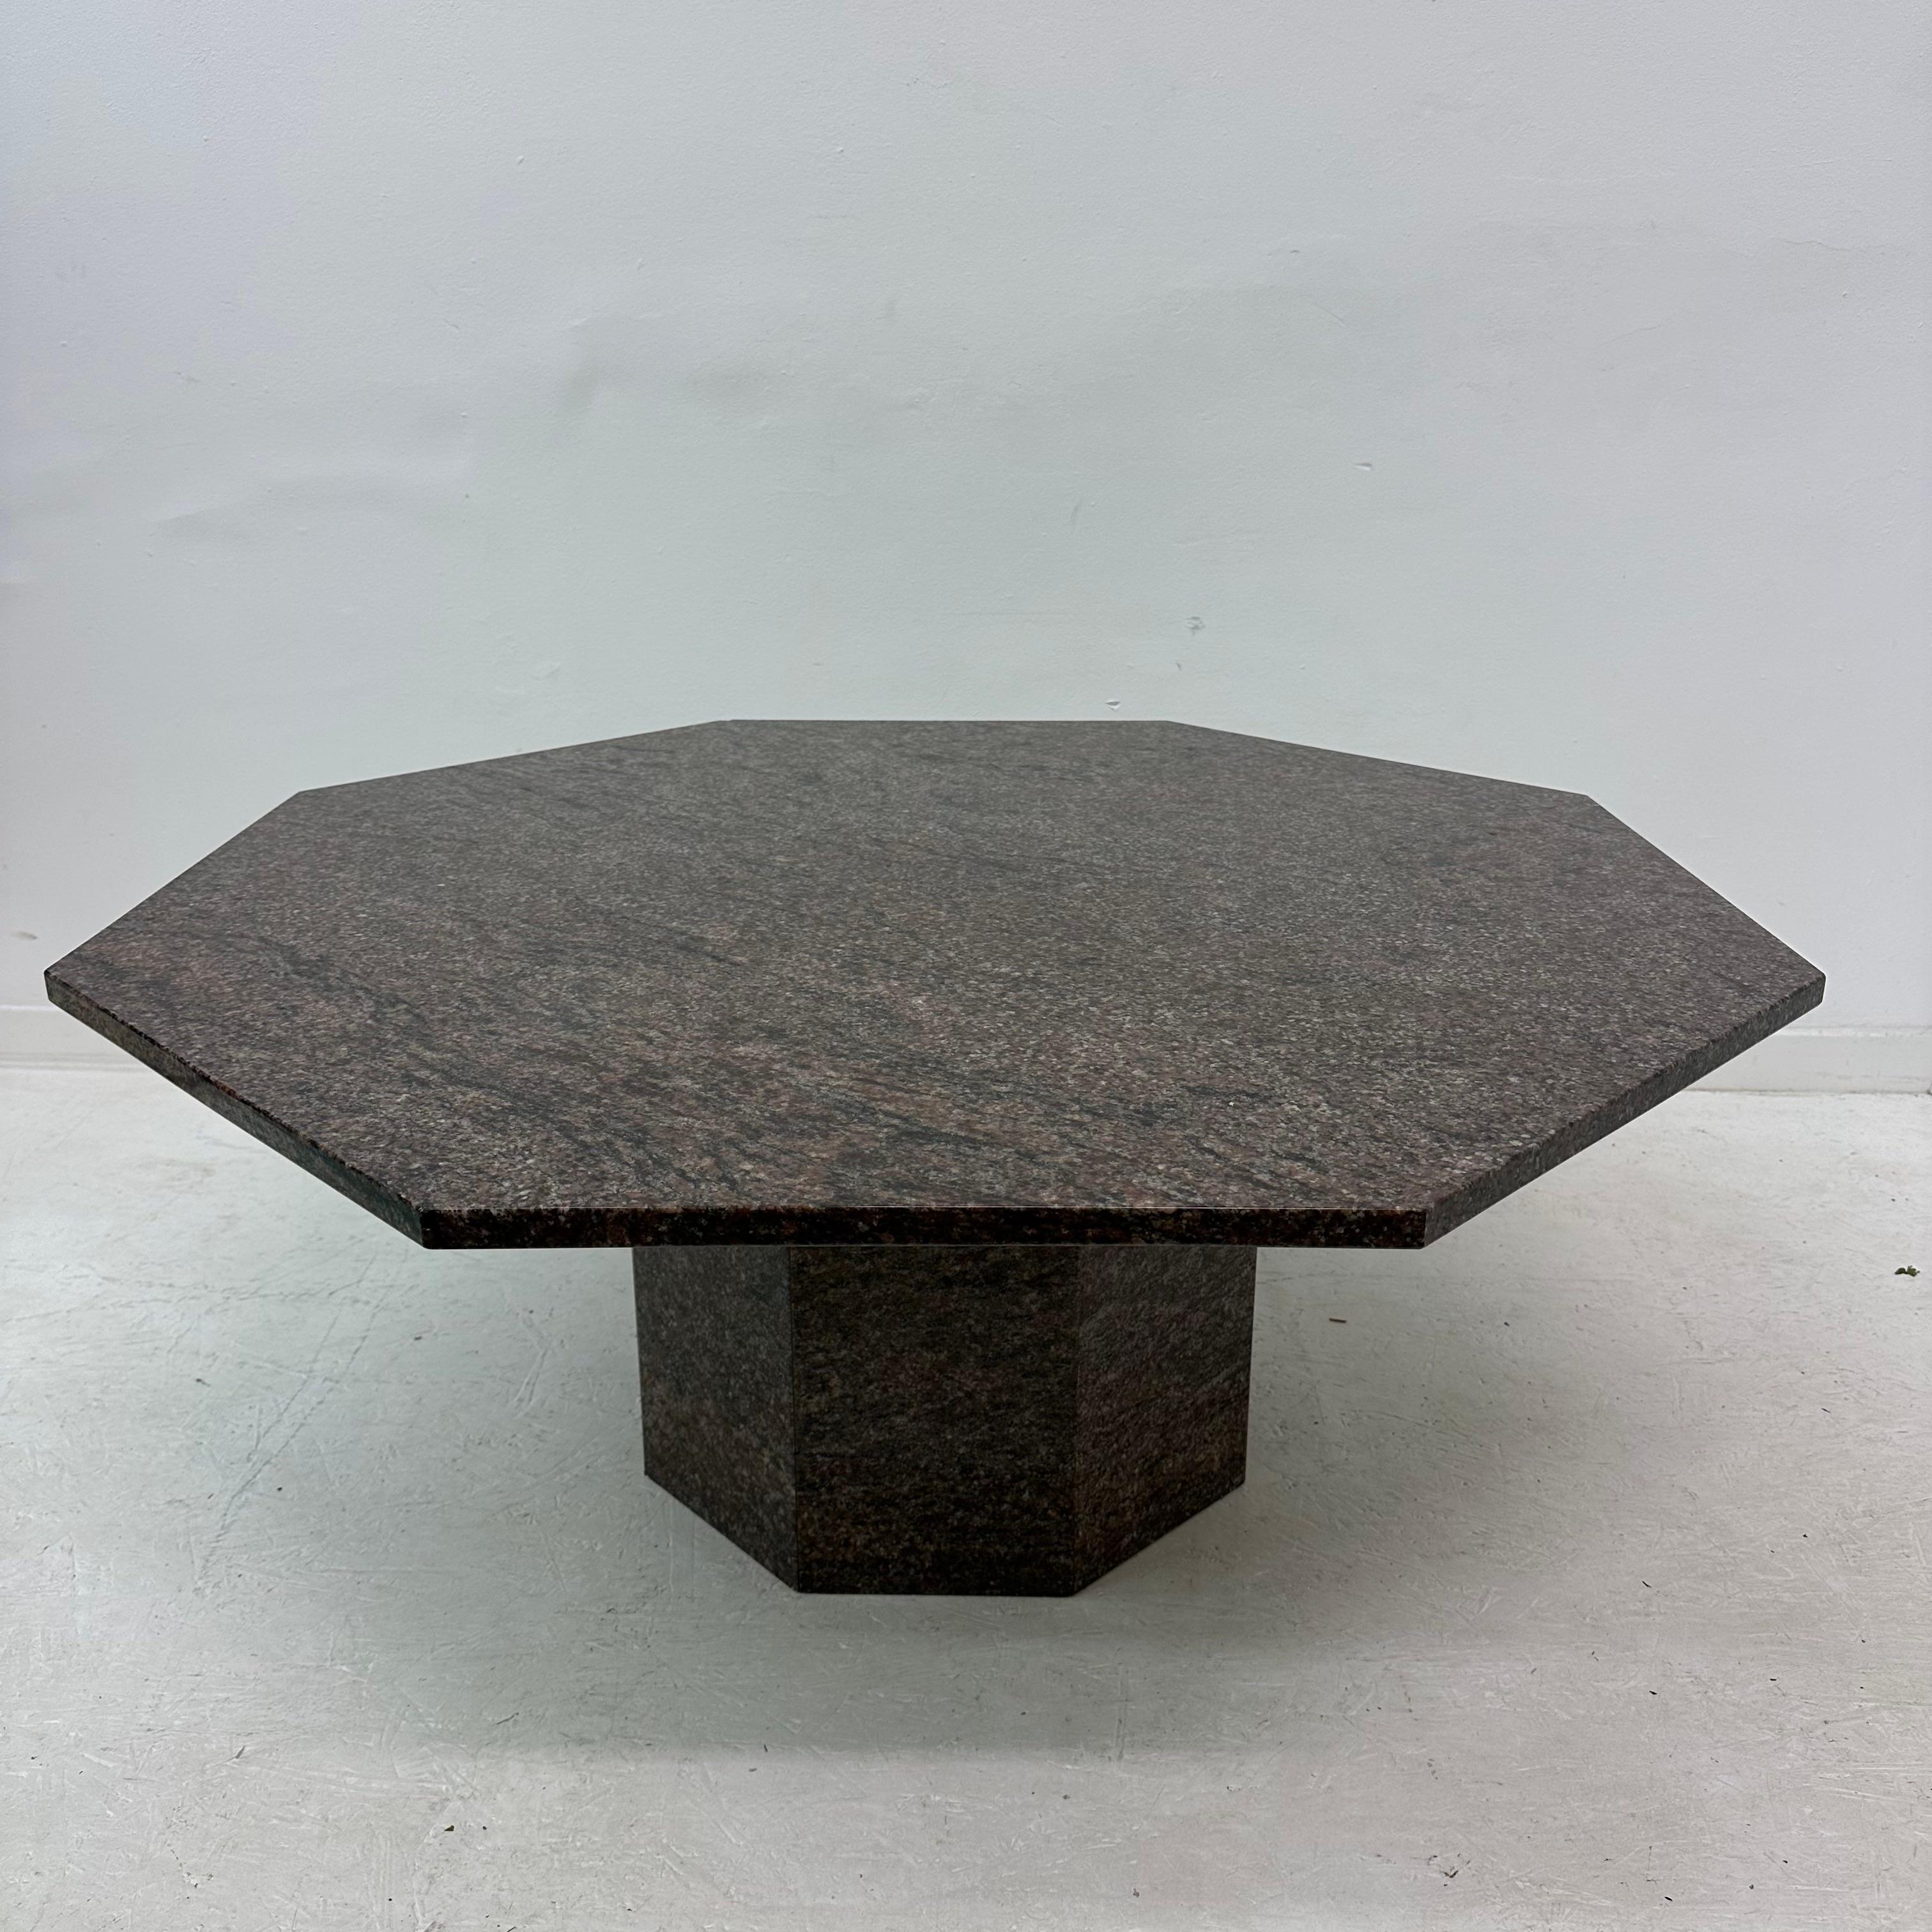 Mid century hexagonal granite coffee table, 1980’s

Dimensions: 100cm W , 100cmD, 42cmH
Period: 1980’s
Condition: Good had one small chip see photos.